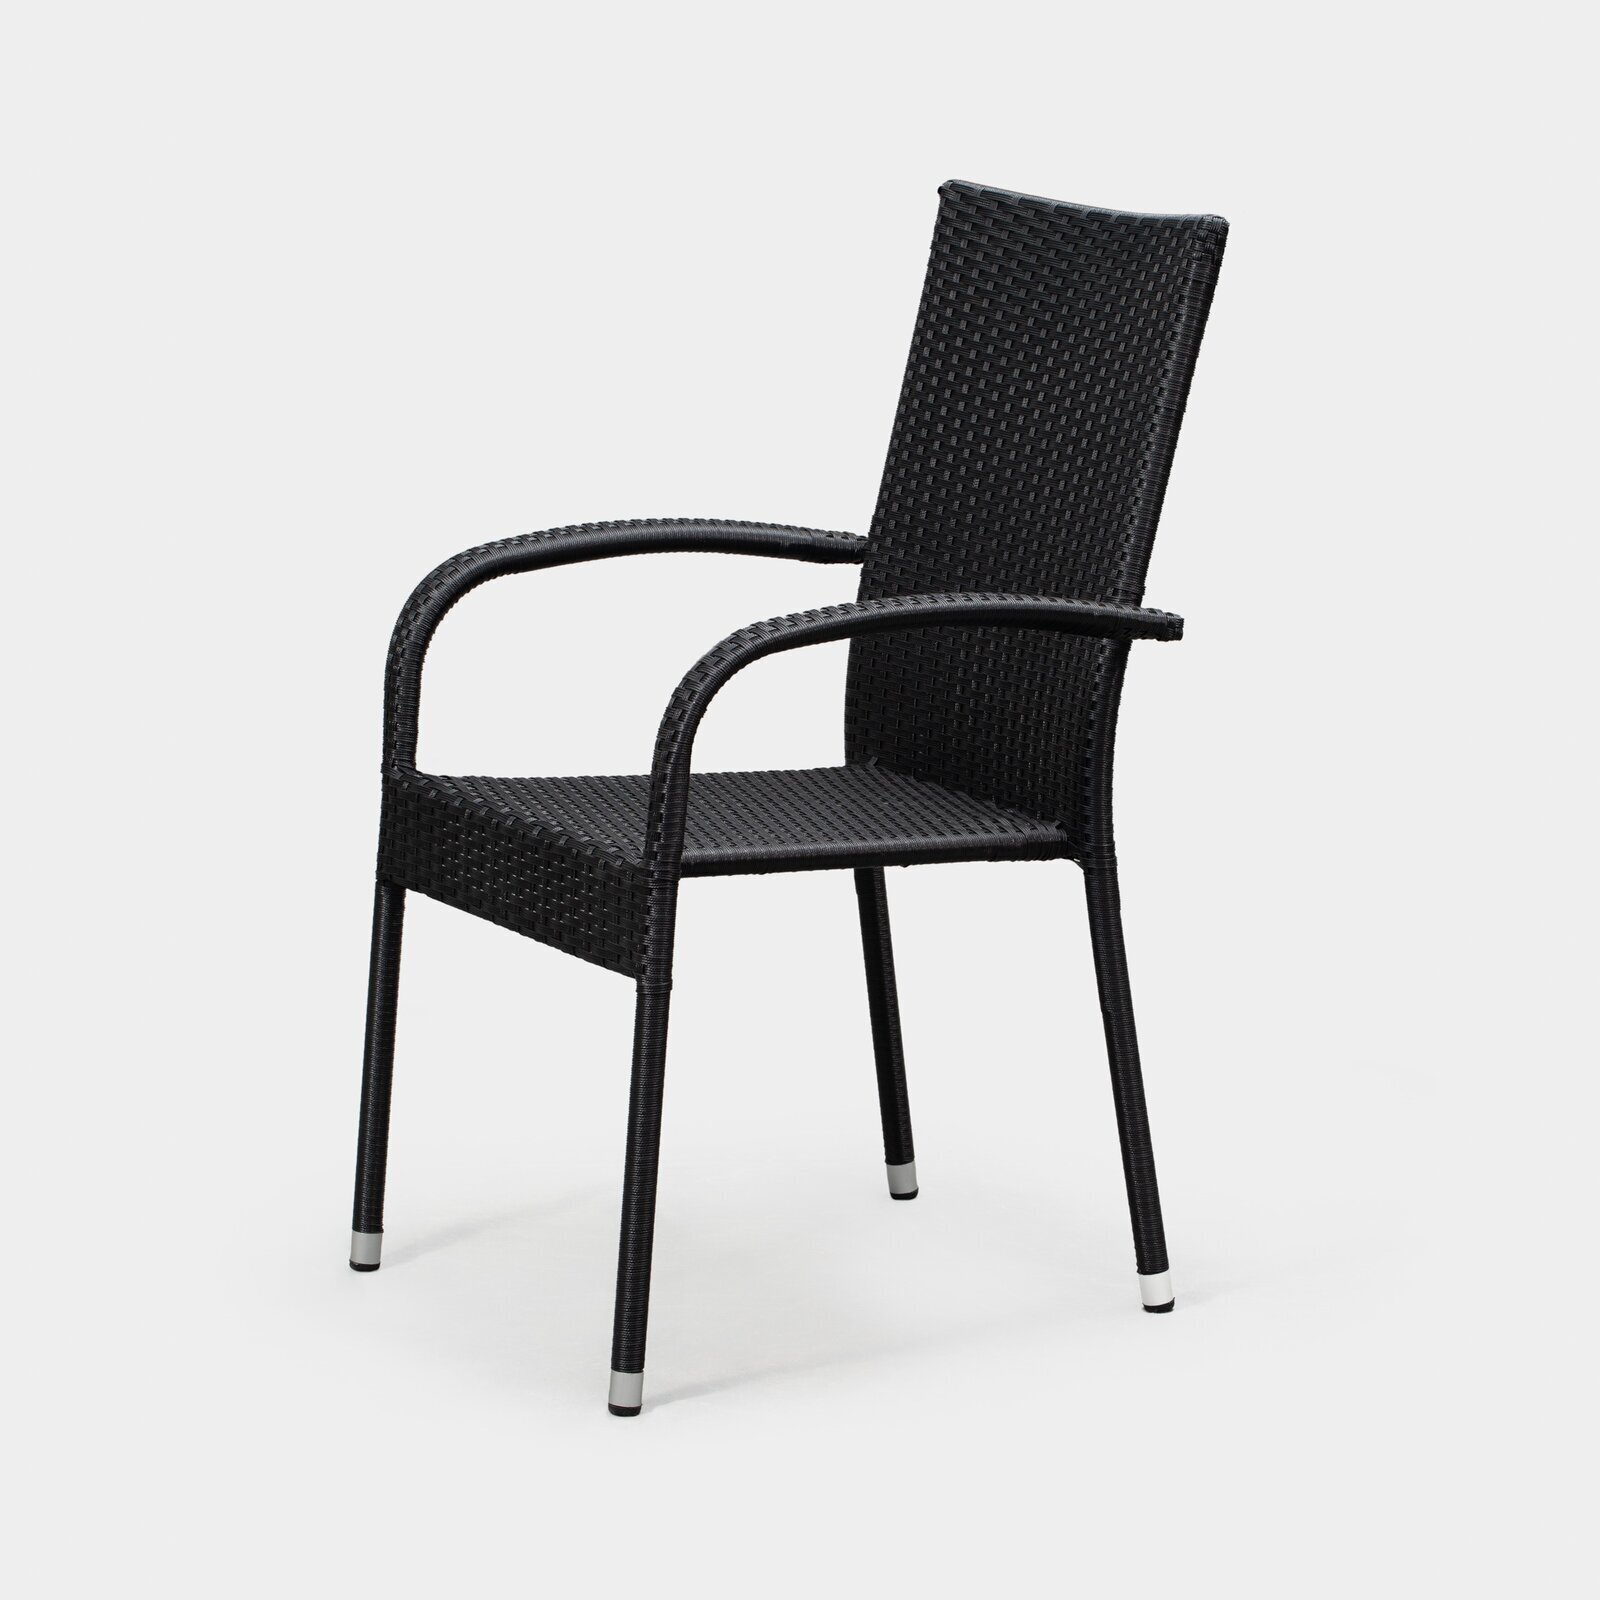 Simple Black Wicker Outdoor Dining Chairs